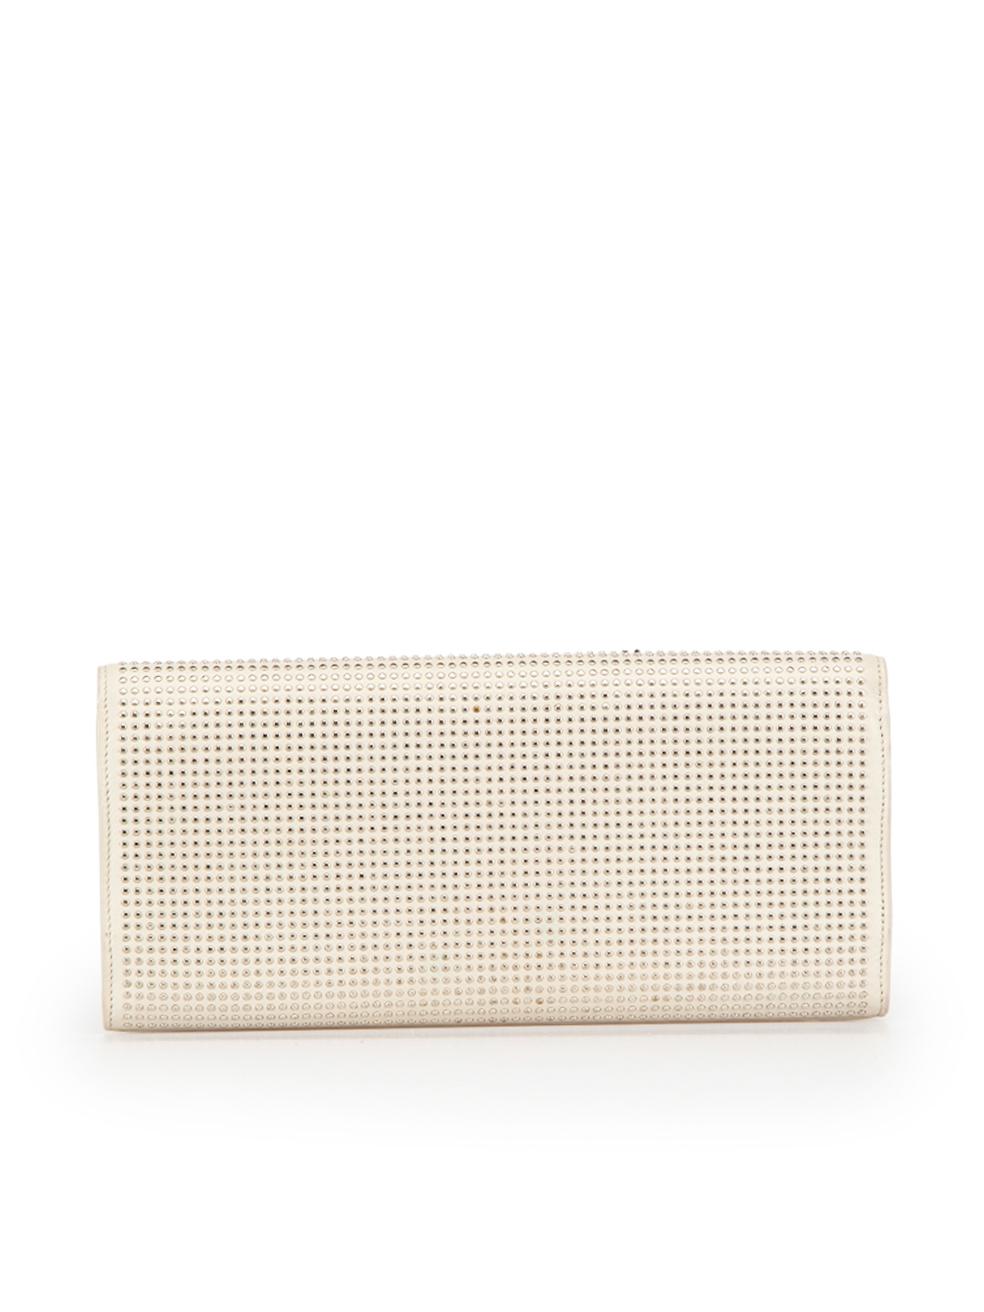 Saint Laurent Grey Leather Studded Lutetia Clutch In Good Condition For Sale In London, GB